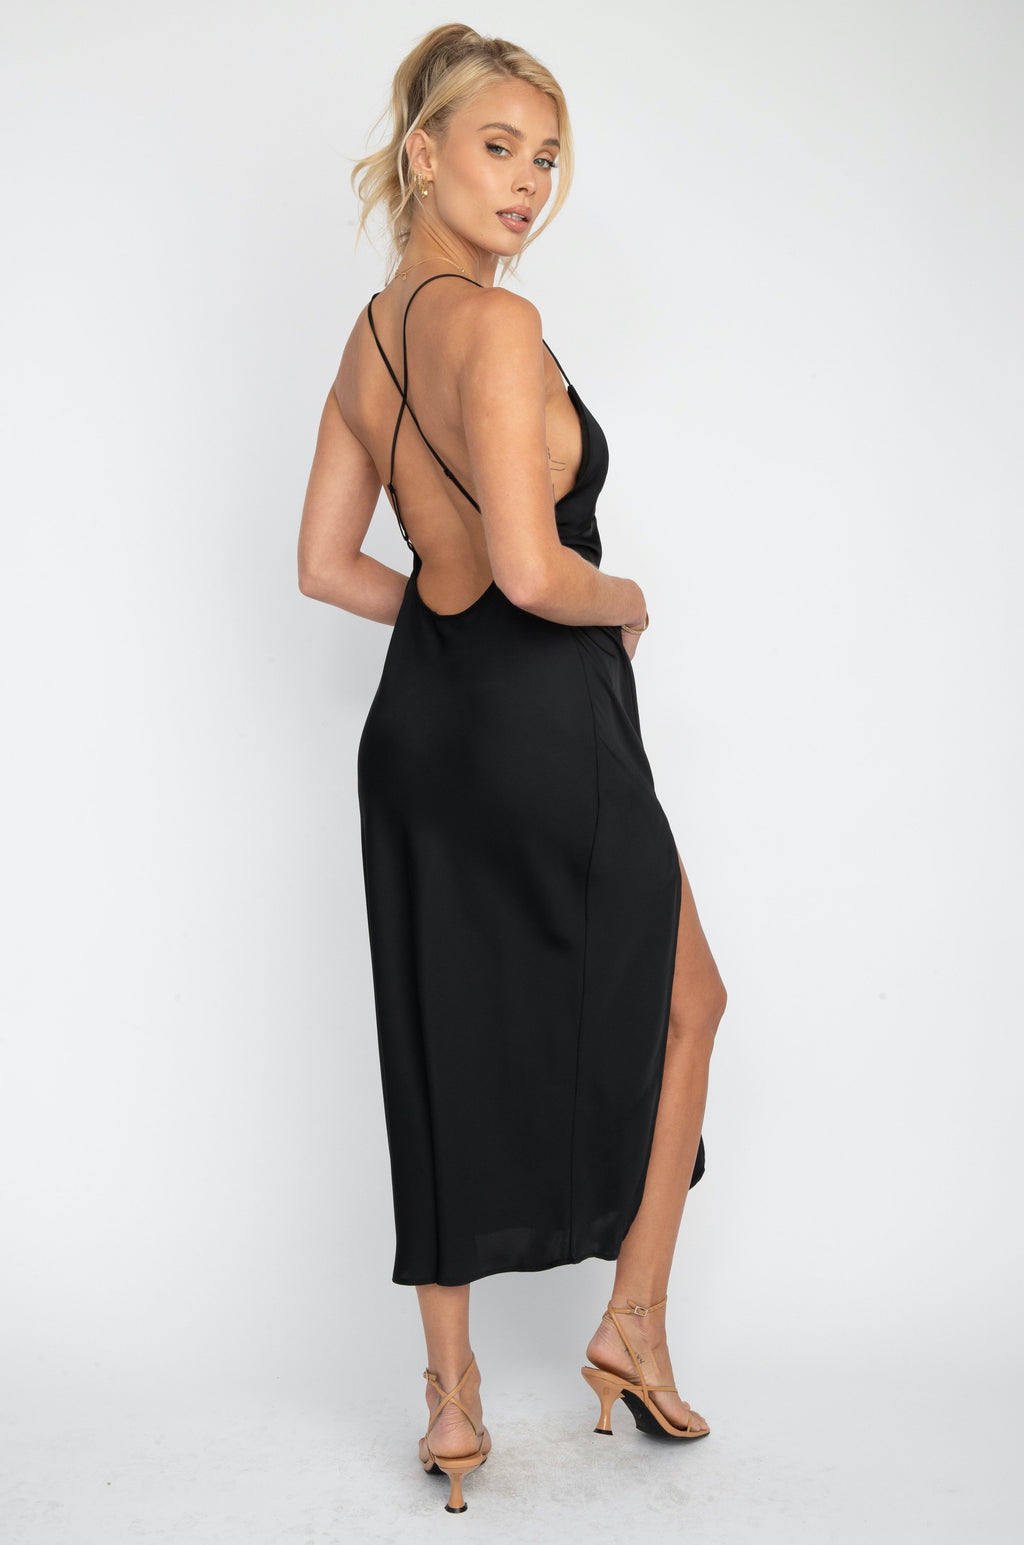 This is an image of Harper Slip Dress - RESA featuring a model wearing the dress